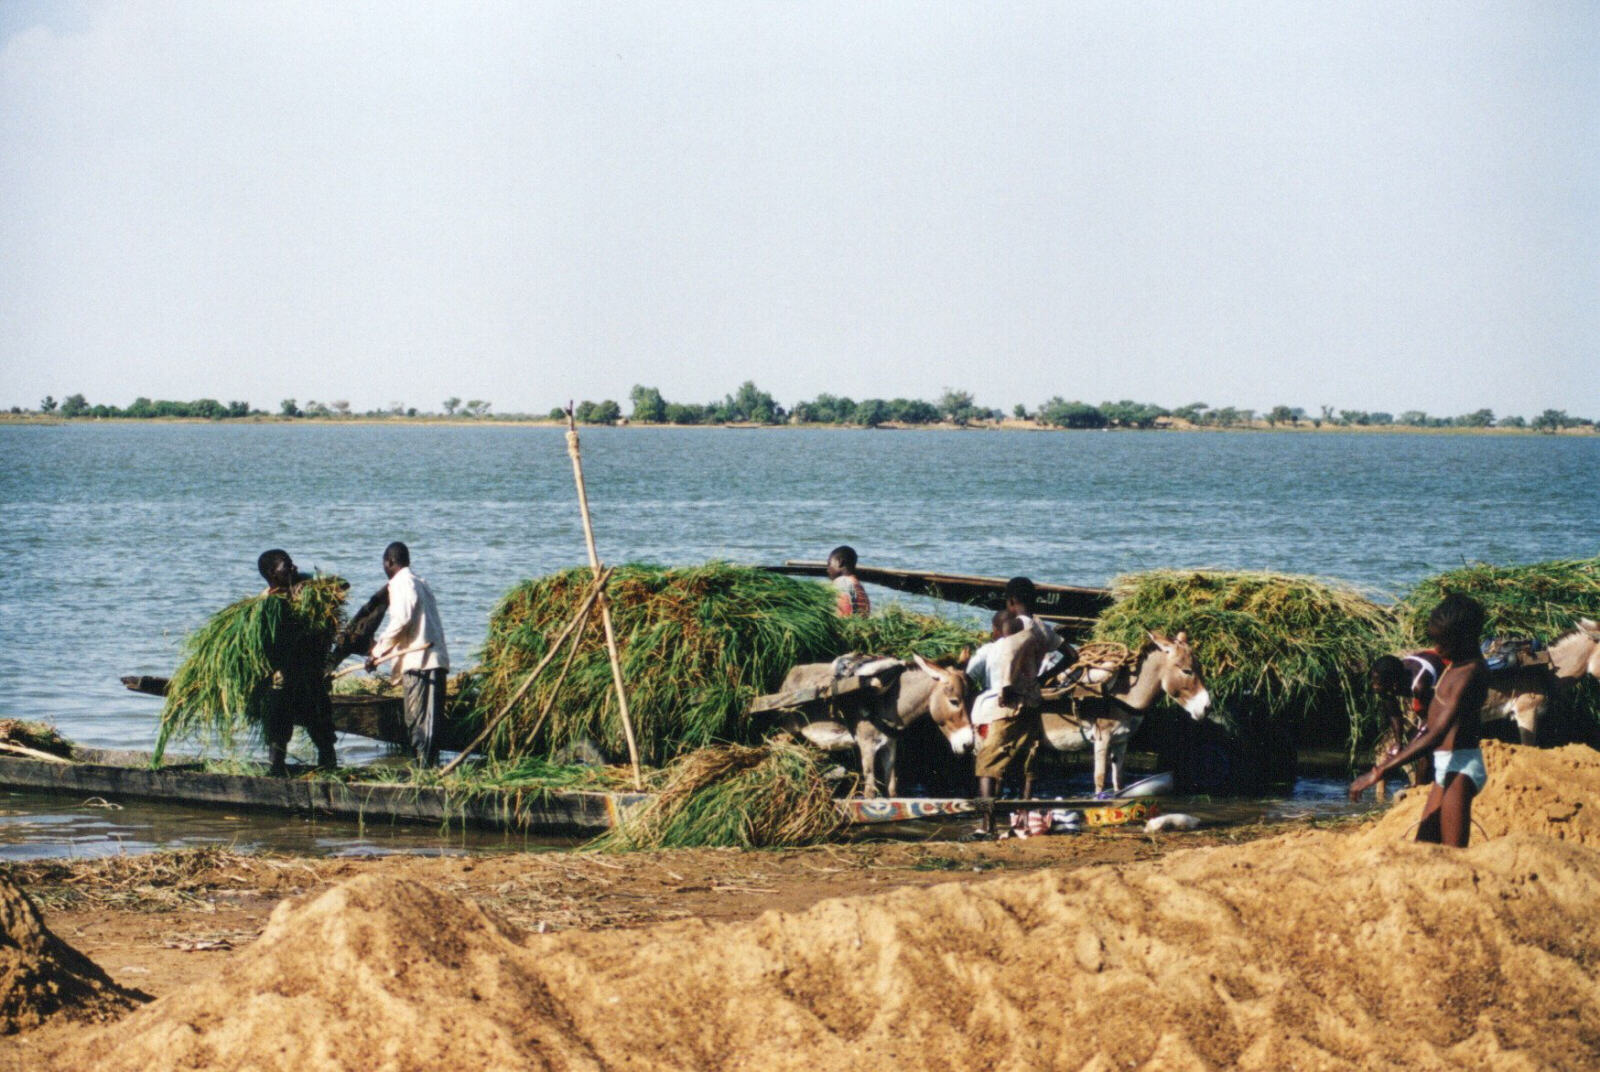 Unloading boats on the Niger riverfront in Segou, Mali